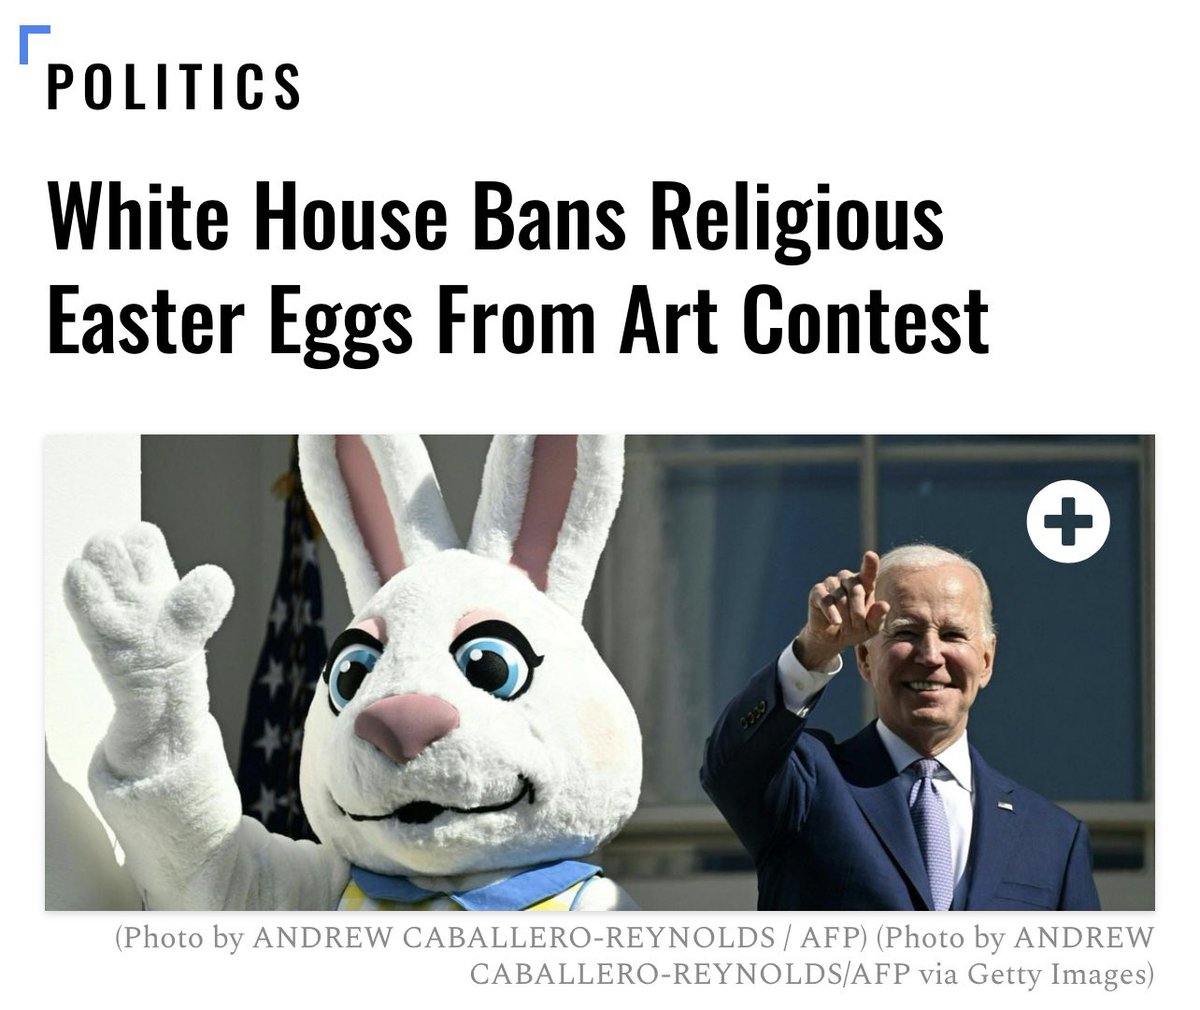 The Biden White House has betrayed the central tenet of Easter — which is the resurrection of Jesus Christ. Banning sacred truth and tradition—while at the same time proclaiming Easter Sunday as “Transgender Day”—is outrageous and abhorrent. The American people are taking note.